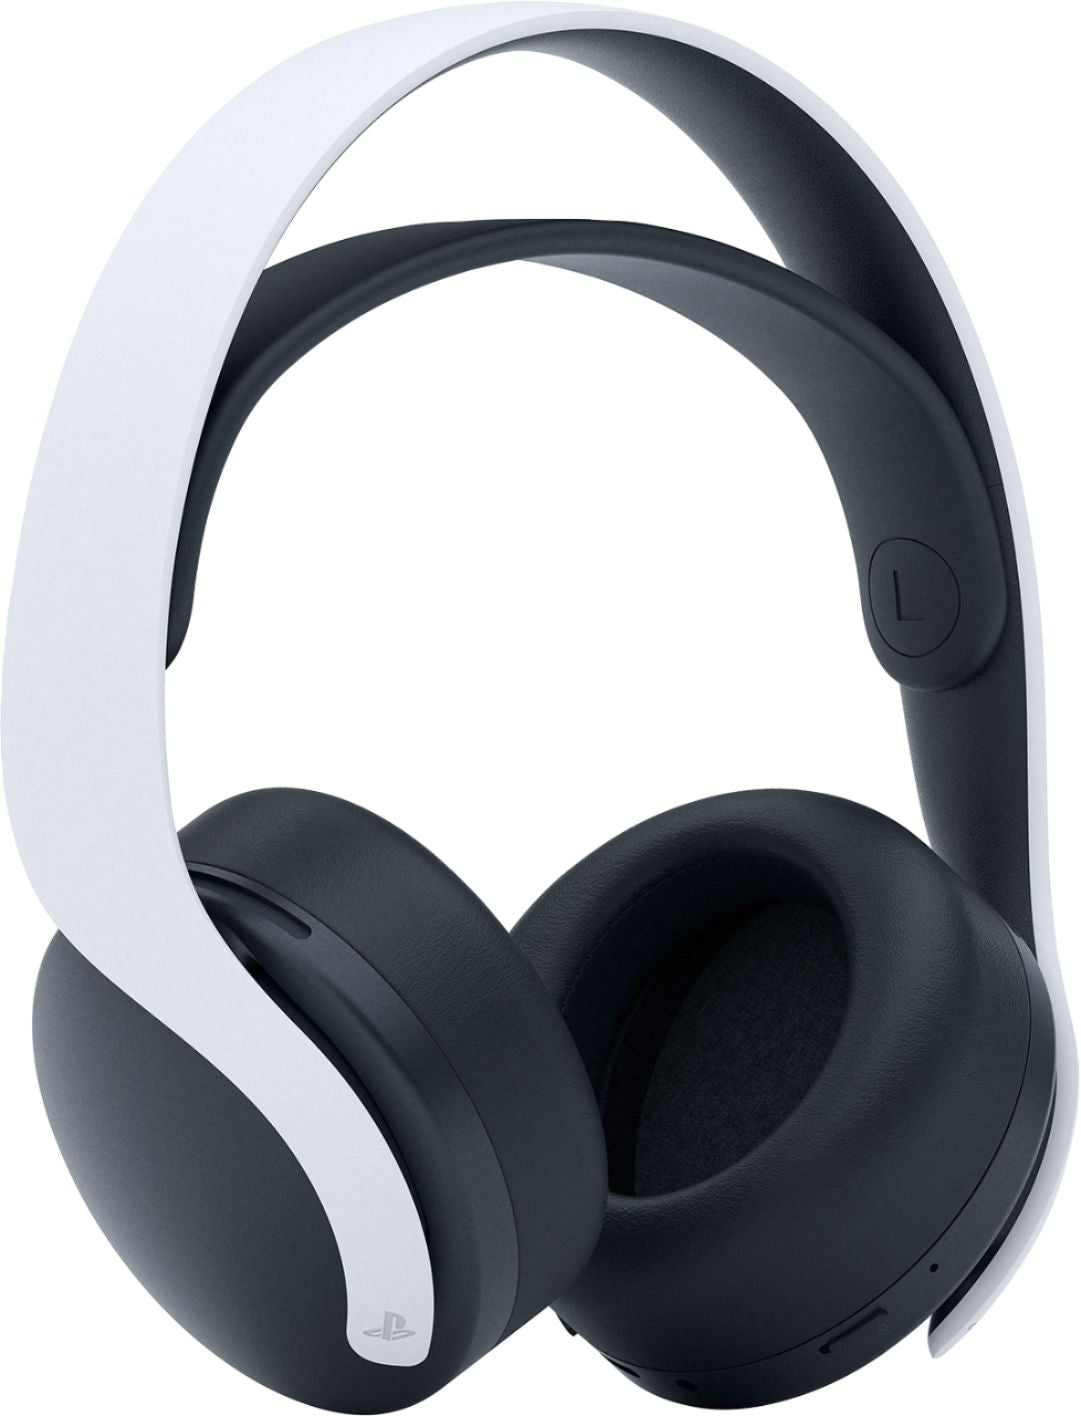 SONY PlayStation 5 Pulse 3D Wireless Headset (White) - (PS5) PlayStation 5 [UNBOXING] Accessories Sony   